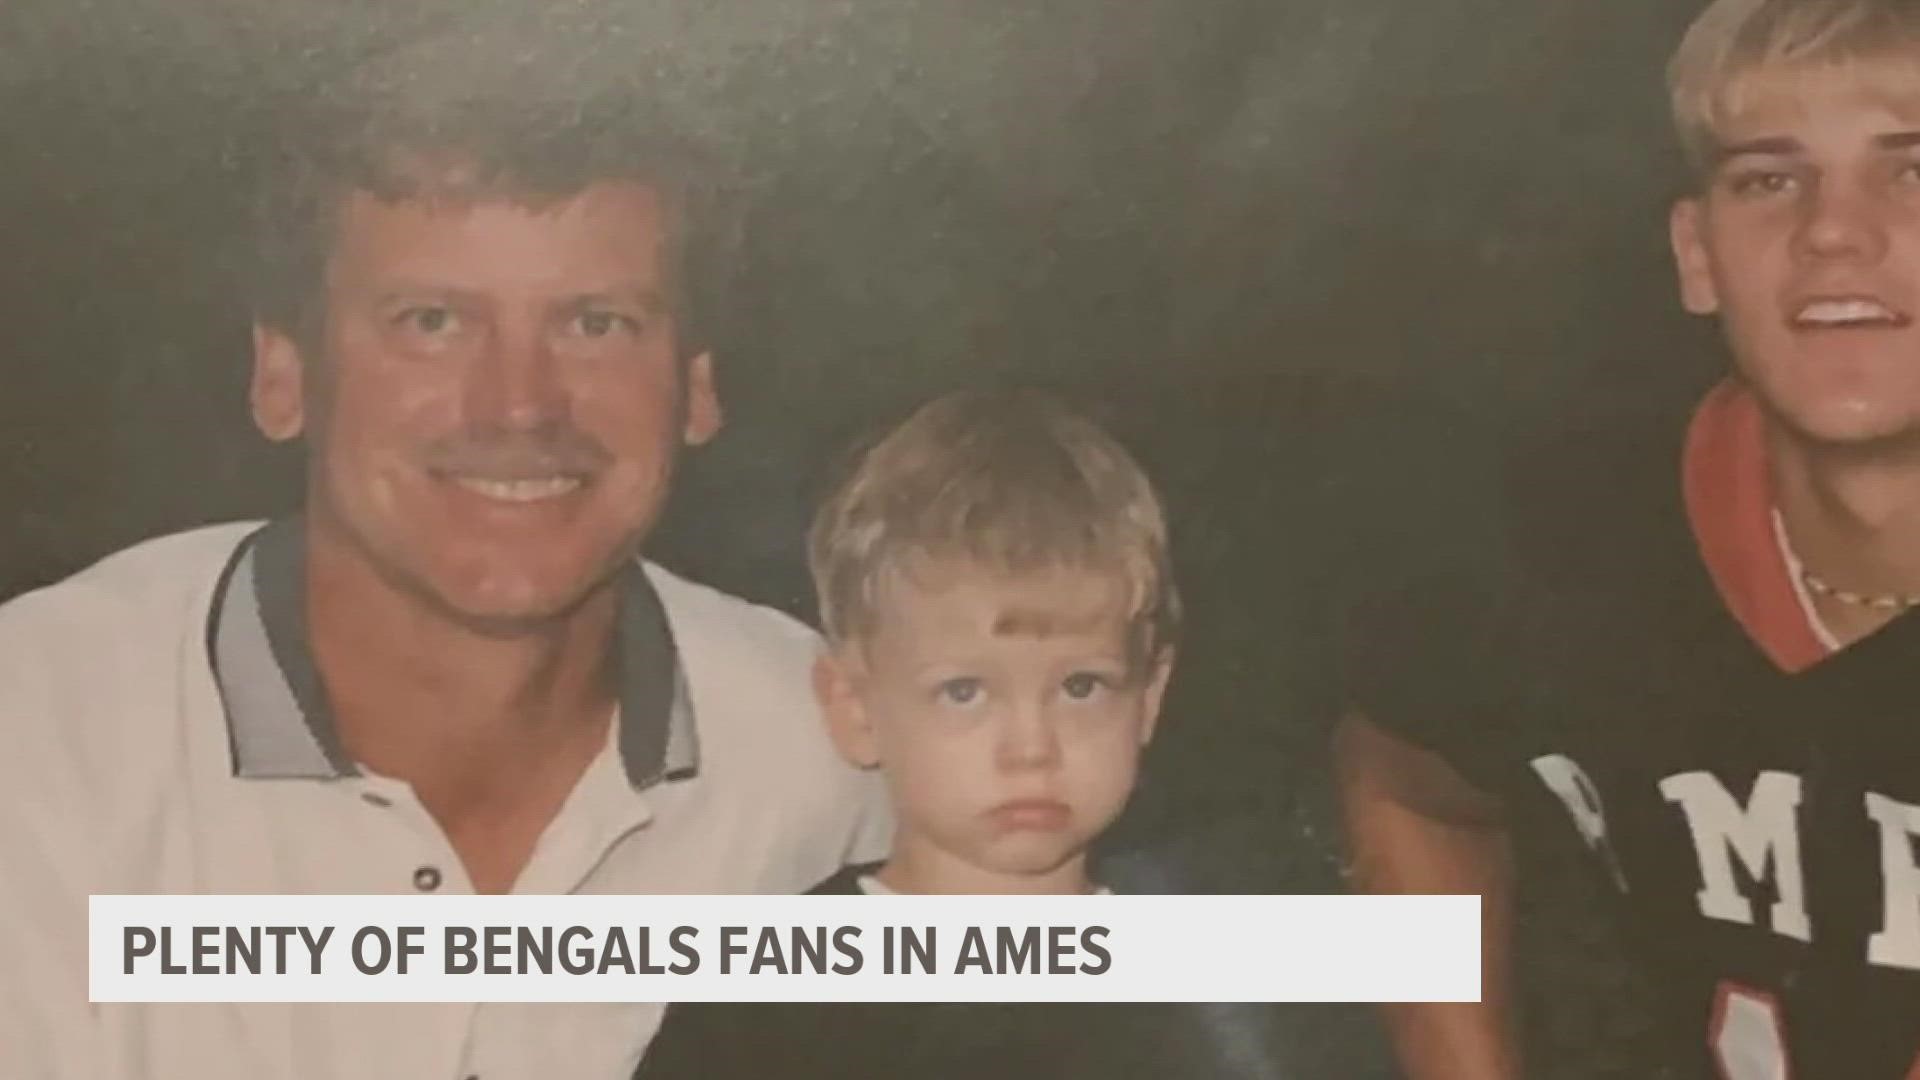 Bengals quarterback Joe Burrow was born in Ames and his father spent nearly a decade coaching at both Iowa State and Ames High School.